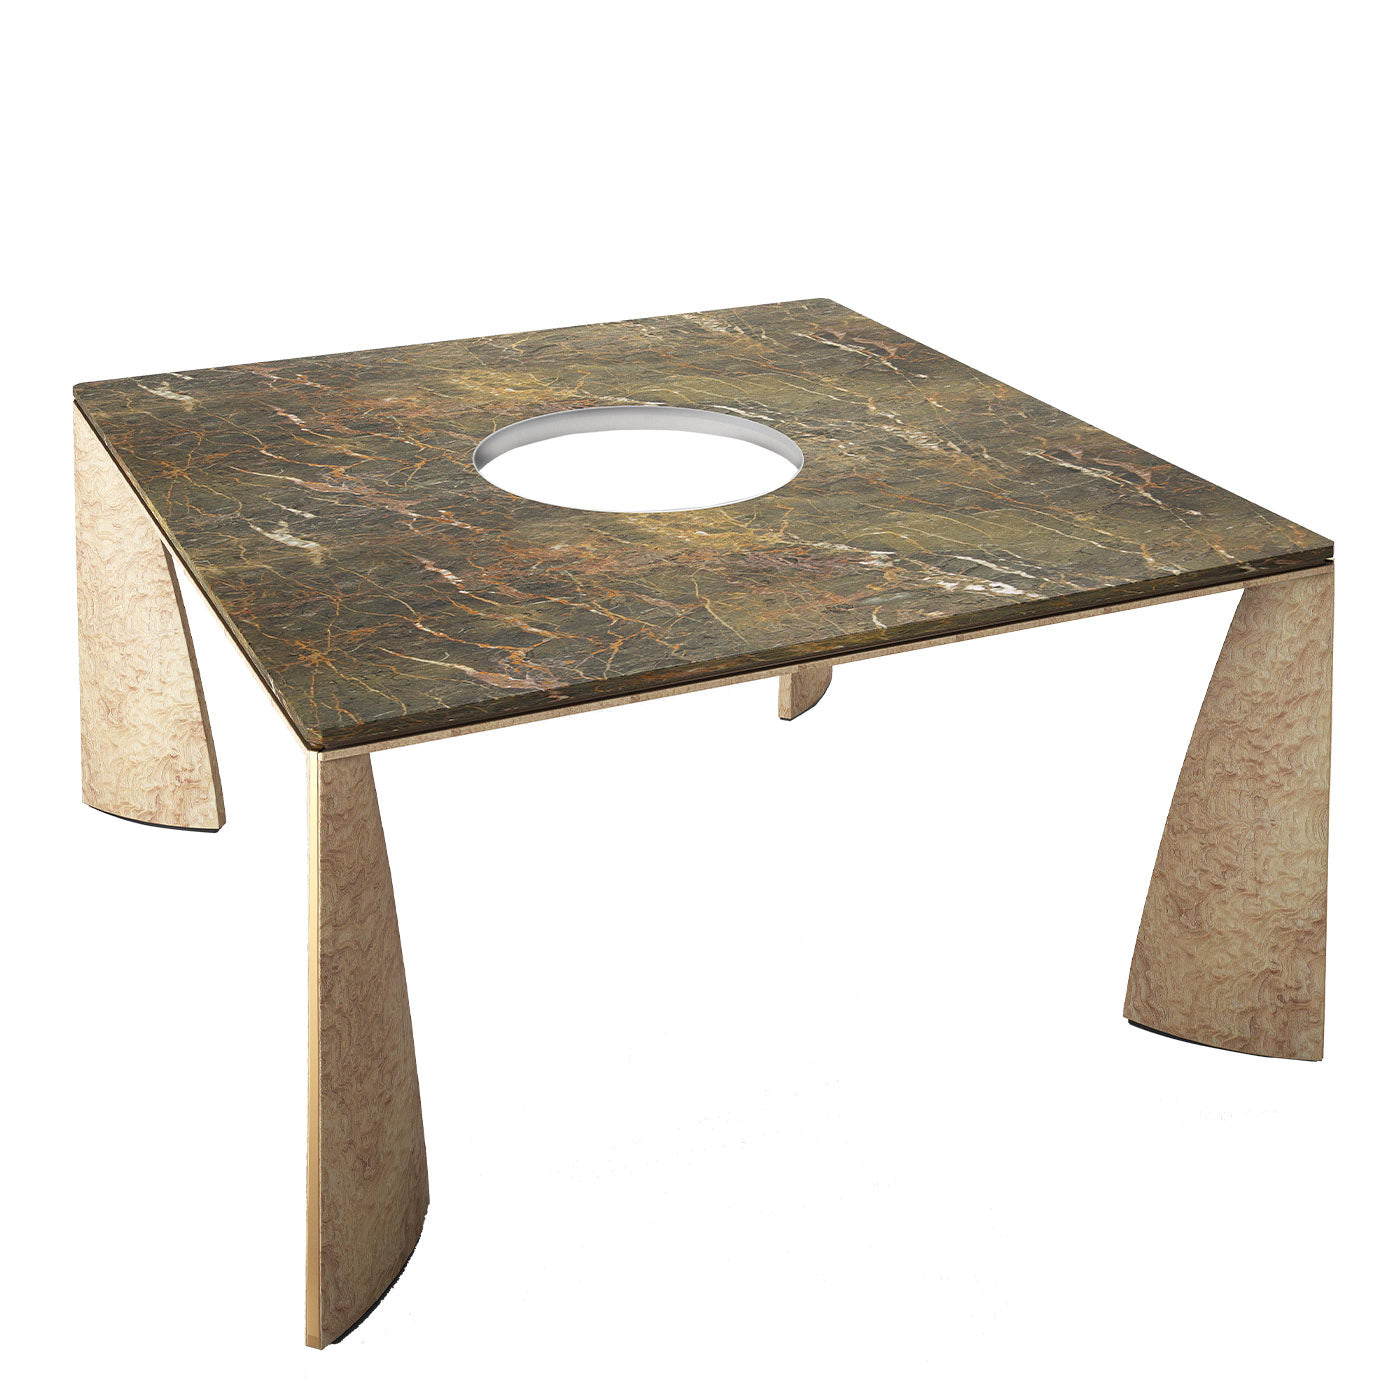 Tamo Wood and Siena Marble Dining Table - Alternative view 2